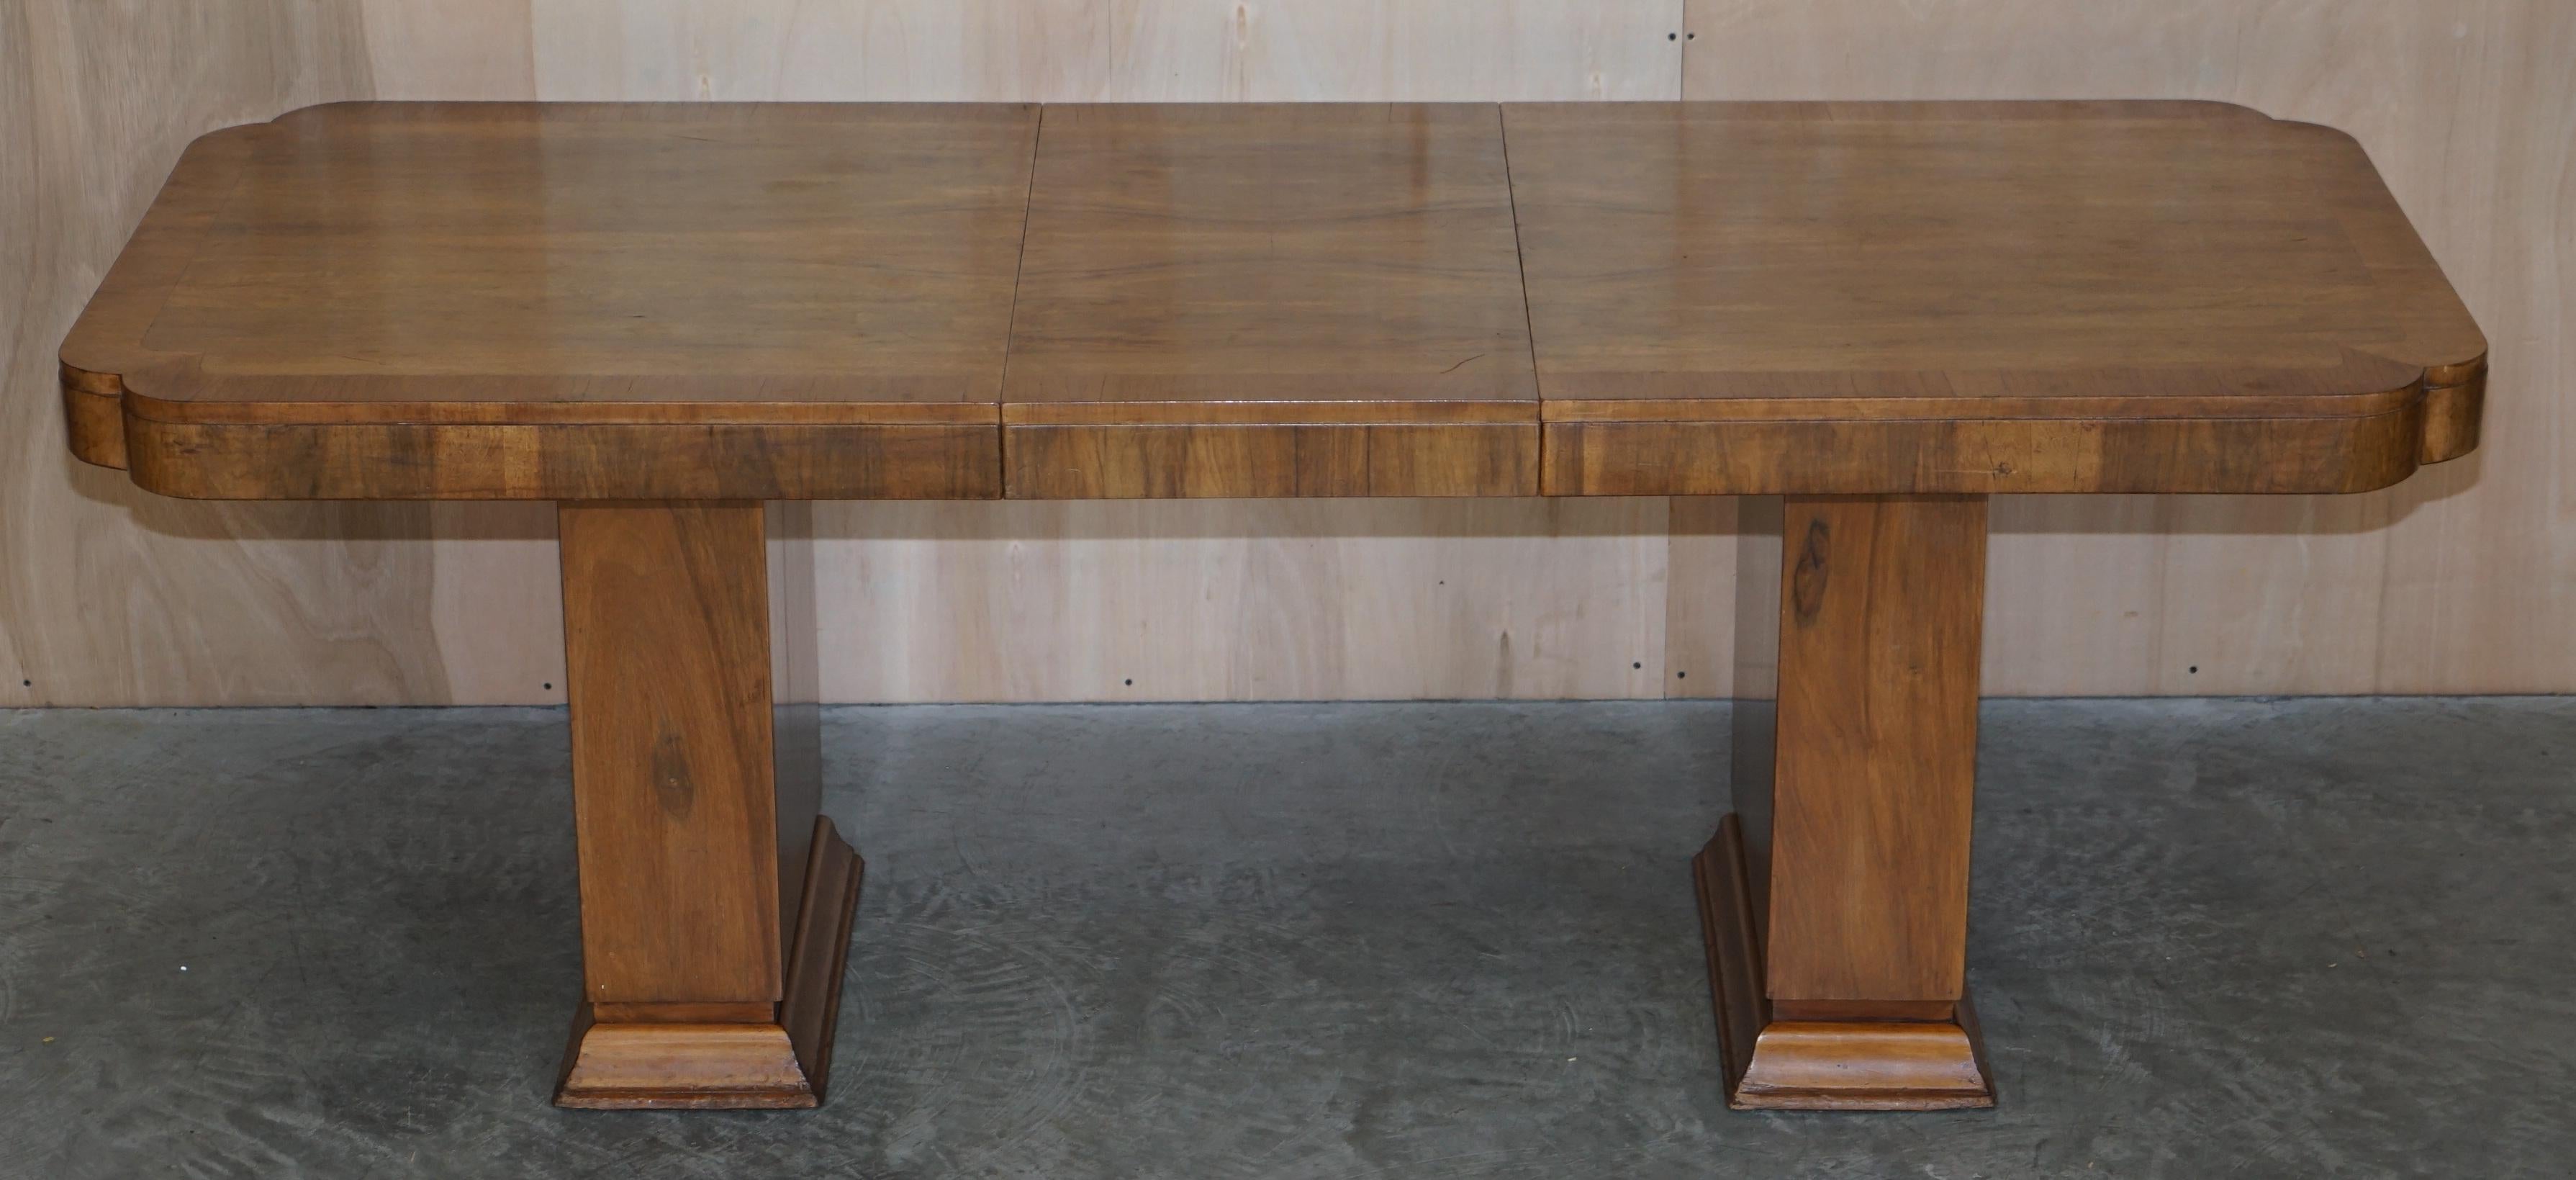 English Lovely Antique Quarter Cut Walnut Art Deco Extending Dining Table, Circa 1920 For Sale